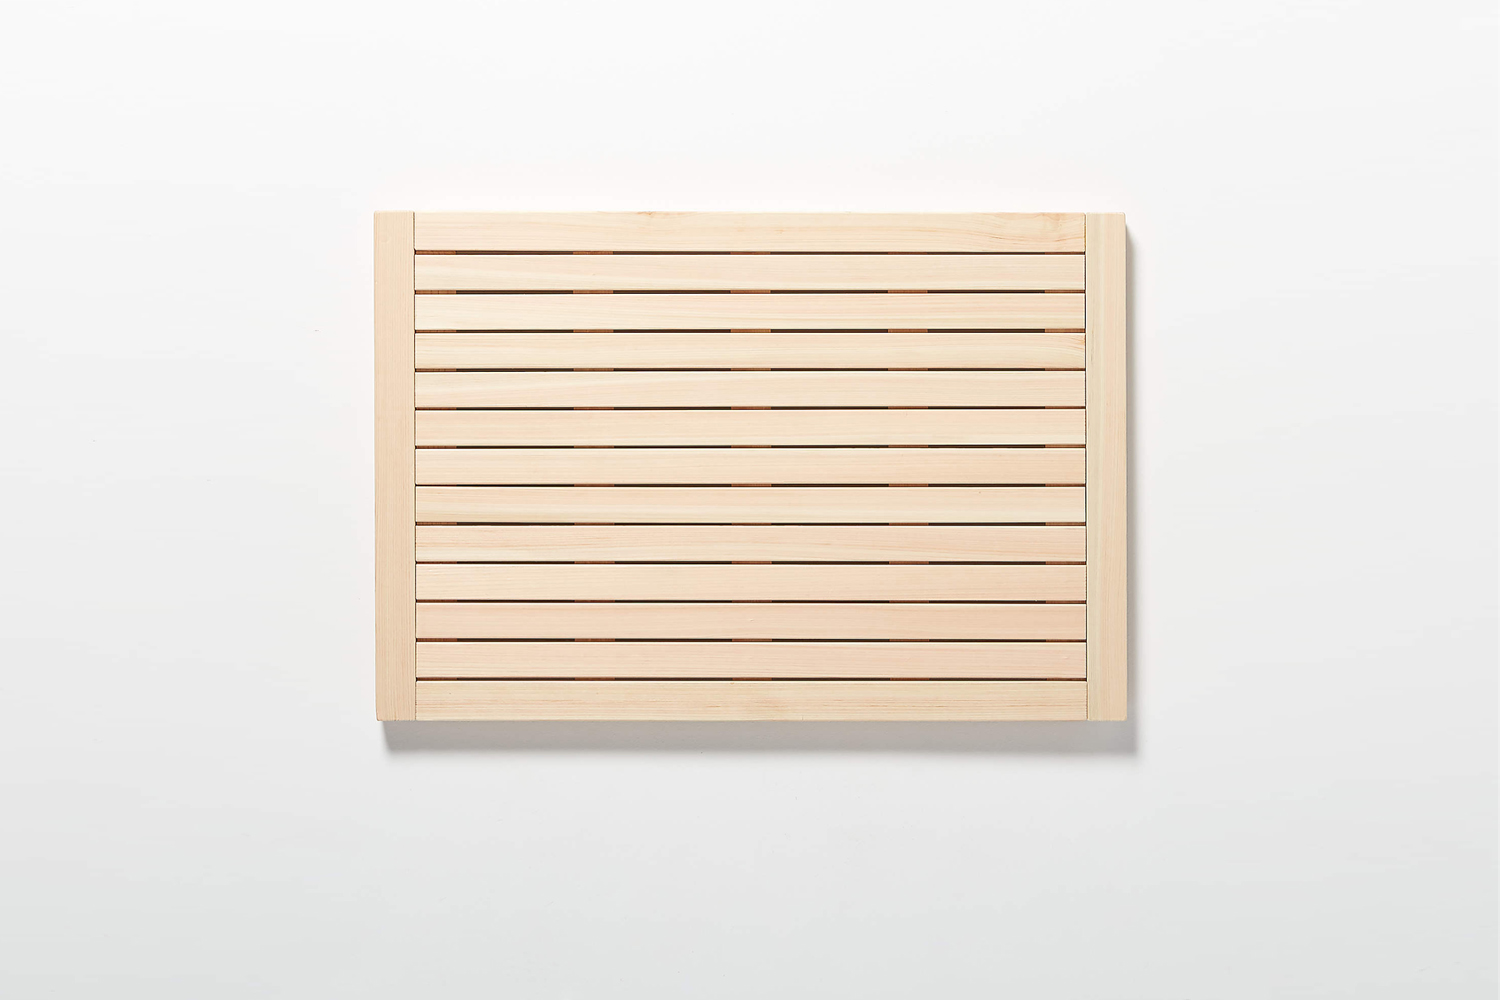 the lateral hinoki wood bath mat from cb2 comes in two sizes: small for .9 11